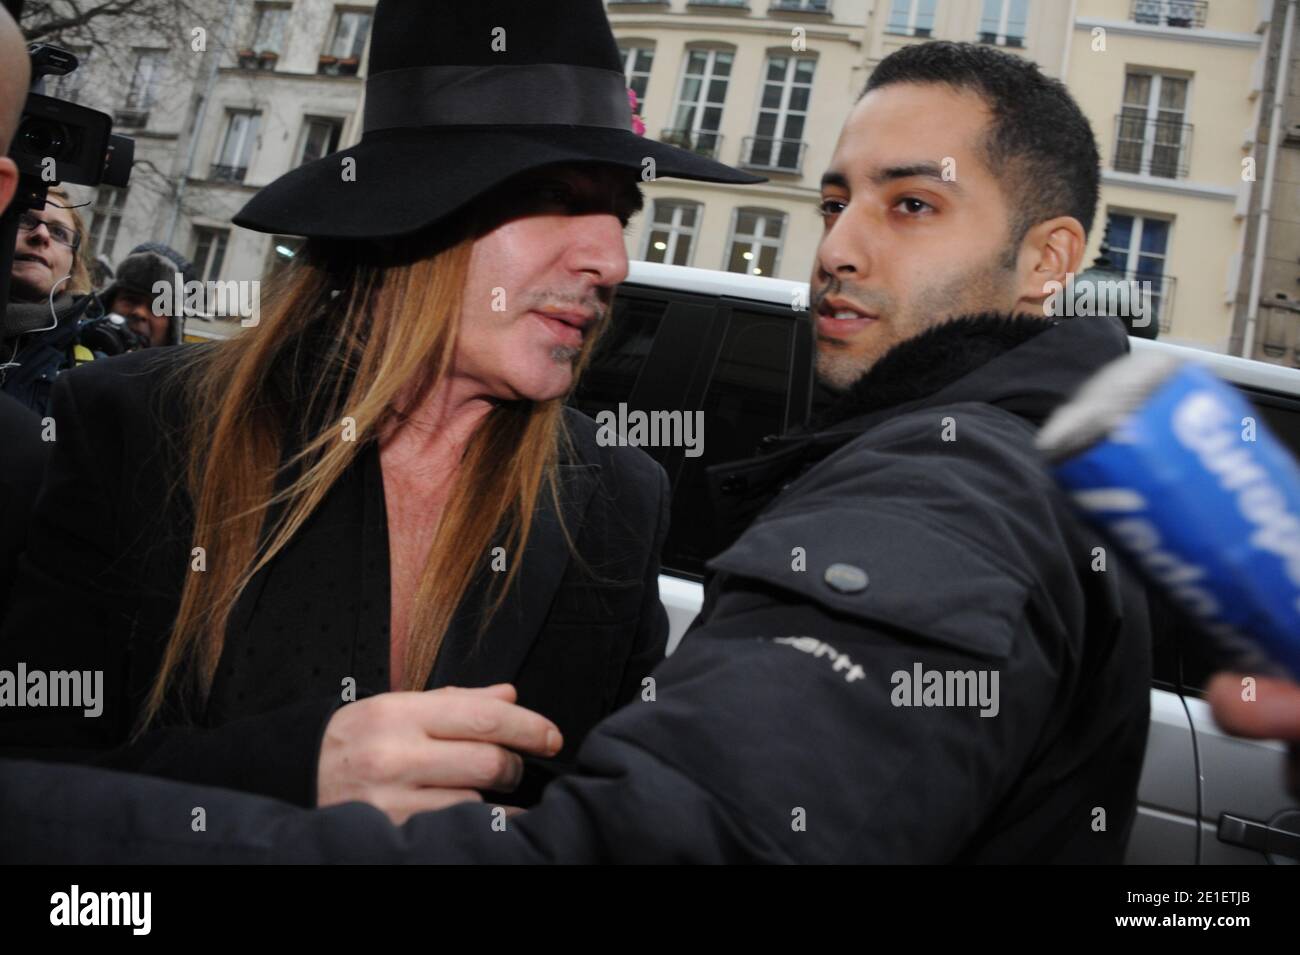 John Galliano is seen arriving at the 3rd arrondissement precinct where he should be confronted with a couple accusing him of anti-Semitic comments in Paris, France on February, 28, 2011. John Galliano, the chief designer at Christian Dior since 1996, has been suspended from his duties at the fashion house after he was arrested for allegedly assaulting a woman and making anti-Semitic remarks at an outdoor Paris cafe 'La Perle'. Photo by Mousse/ABACAPRESS.COM Stock Photo